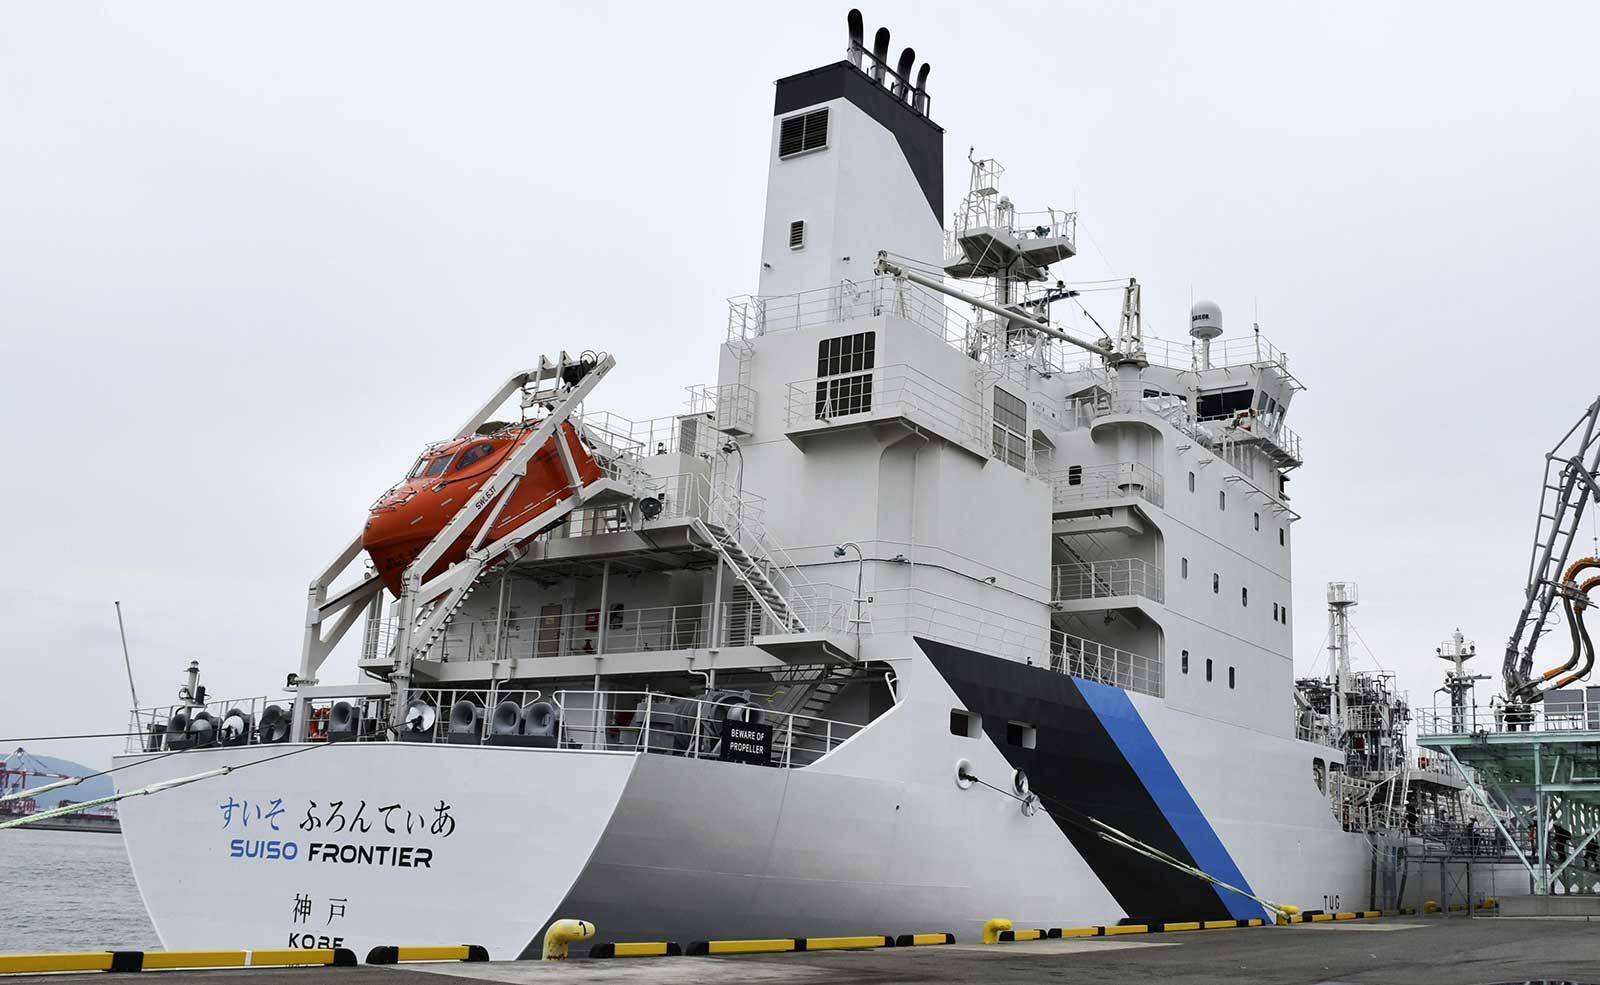 The Suiso Frontier is the world’s first ship designed to transport liquid hydrogen.